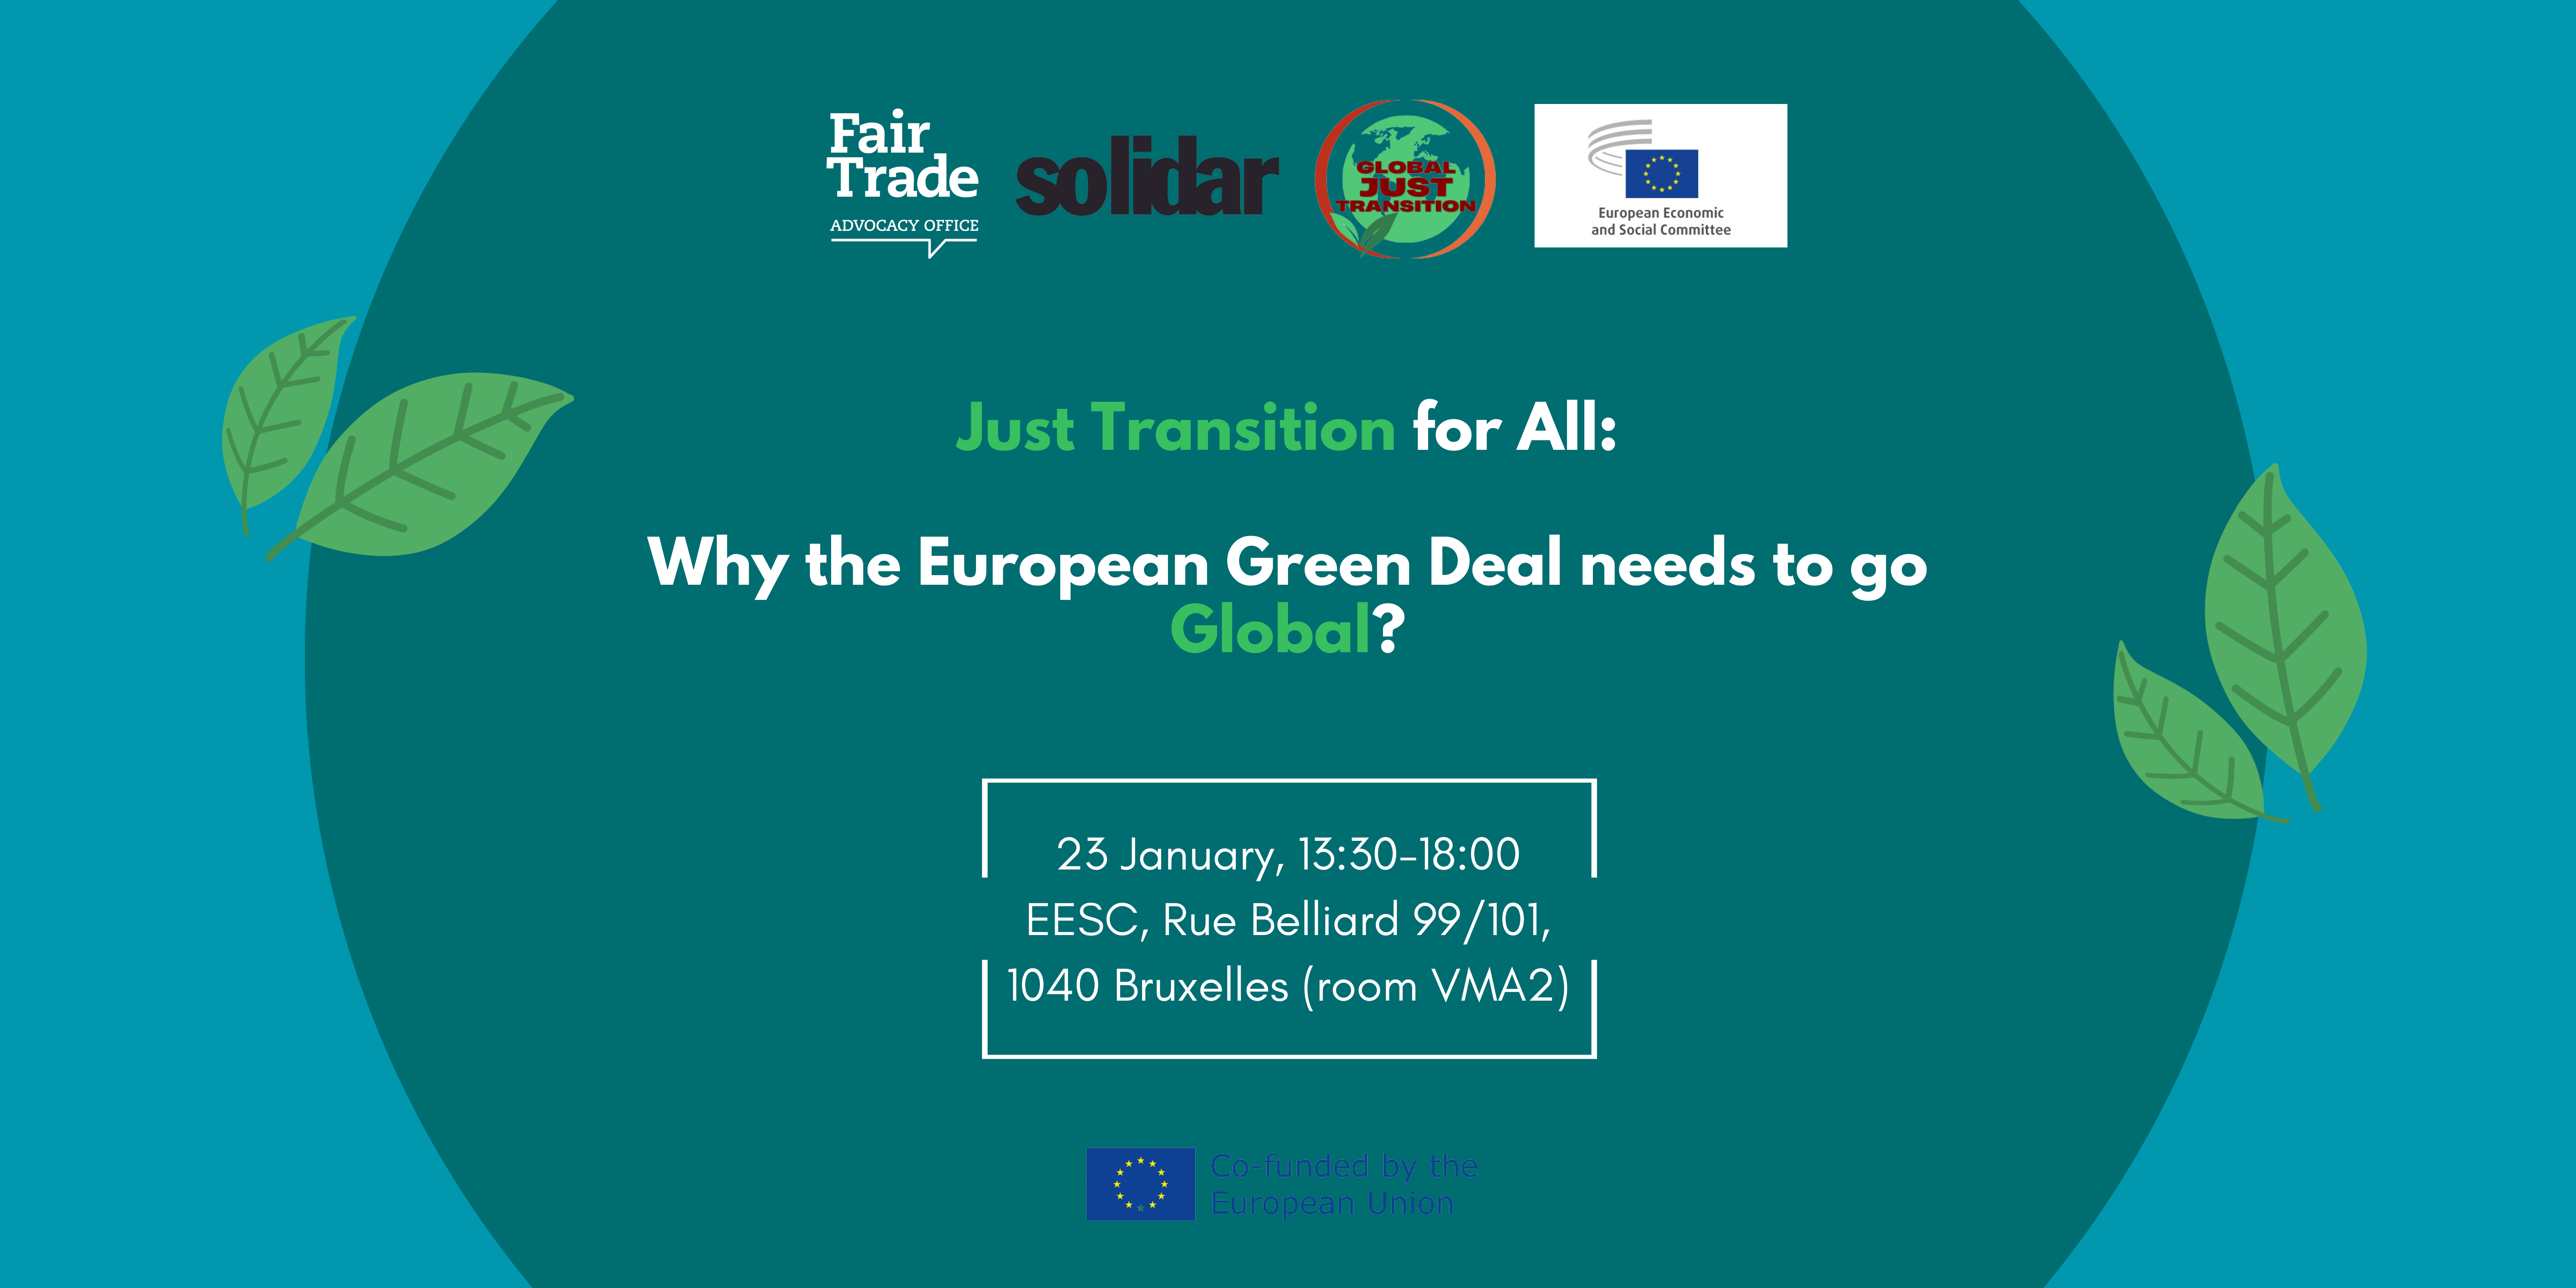 A Just Transition for All: Why the European Green Deal needs to go Global?